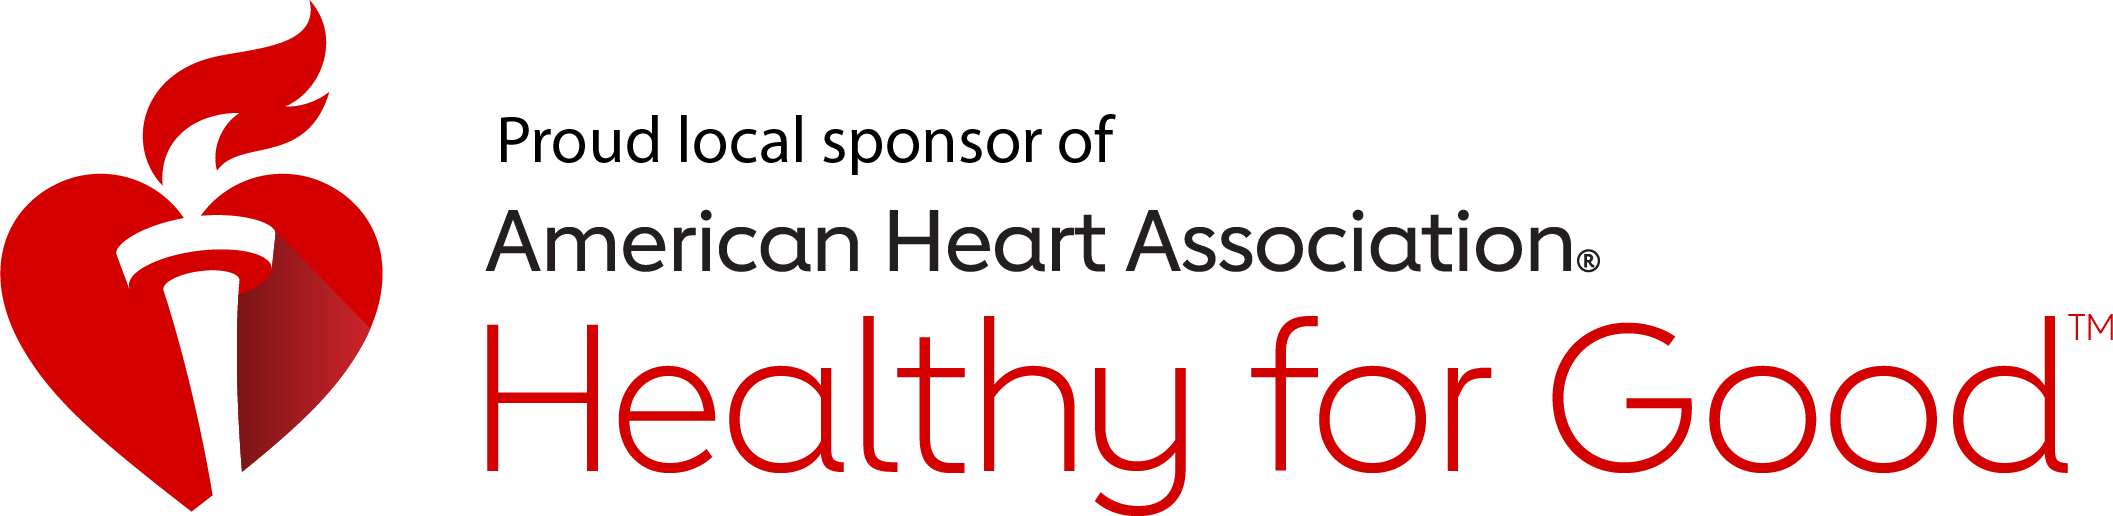 American Heart Association | Healthy for good badge